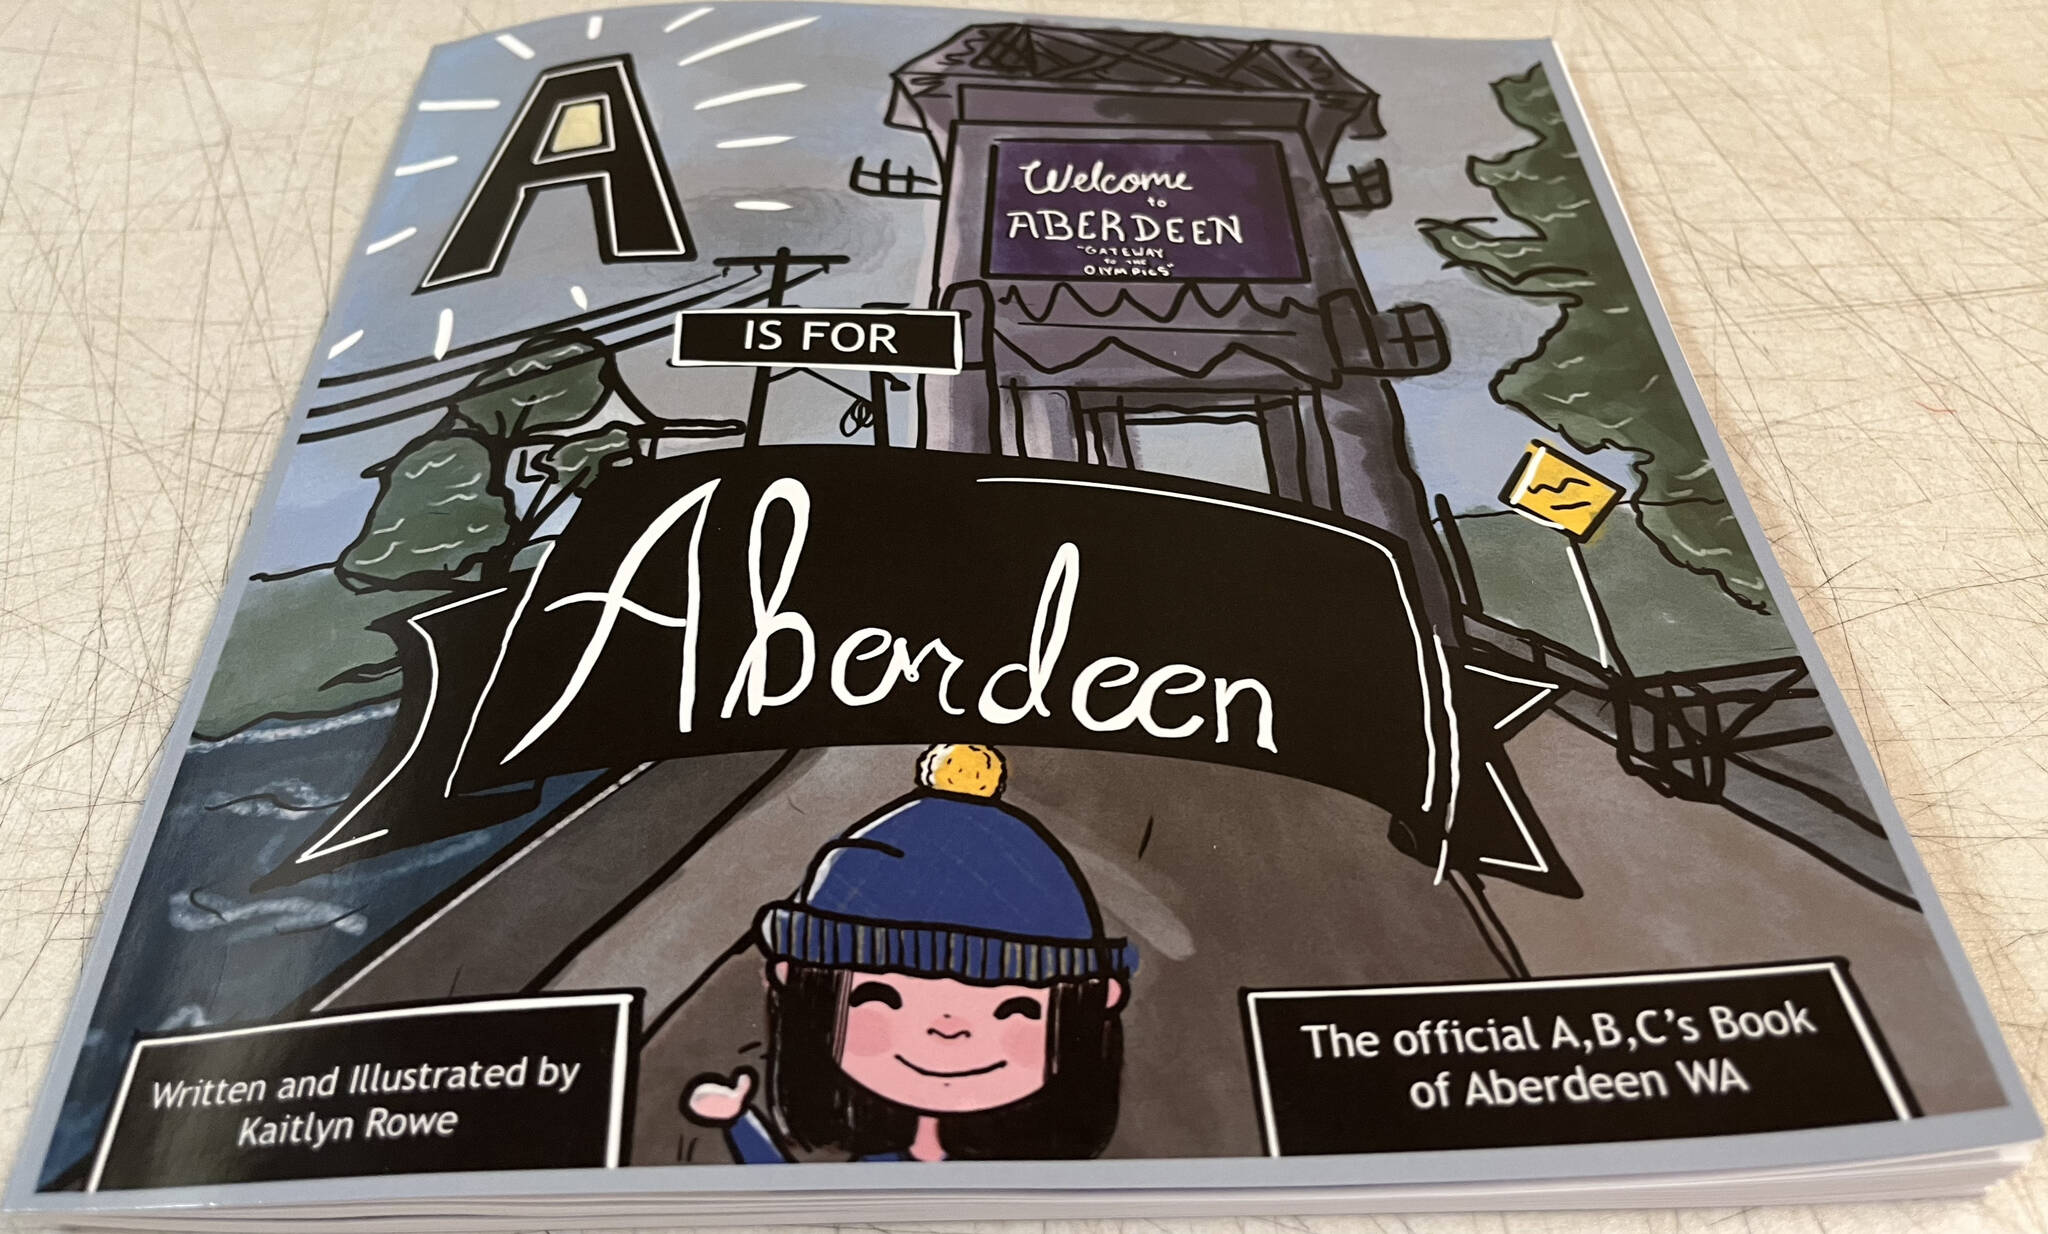 ”A is for Aberdeen,” is a colorful, children’s rhyming book that takes “Wishkah” on a journey through Aberdeen. Kaitlyn Rowe’s book, in which she also provided the illustrations, shows off many of the positive attributes of Aberdeen, including its history, cultural significance, murals, shops, restaurants and coffee shops.